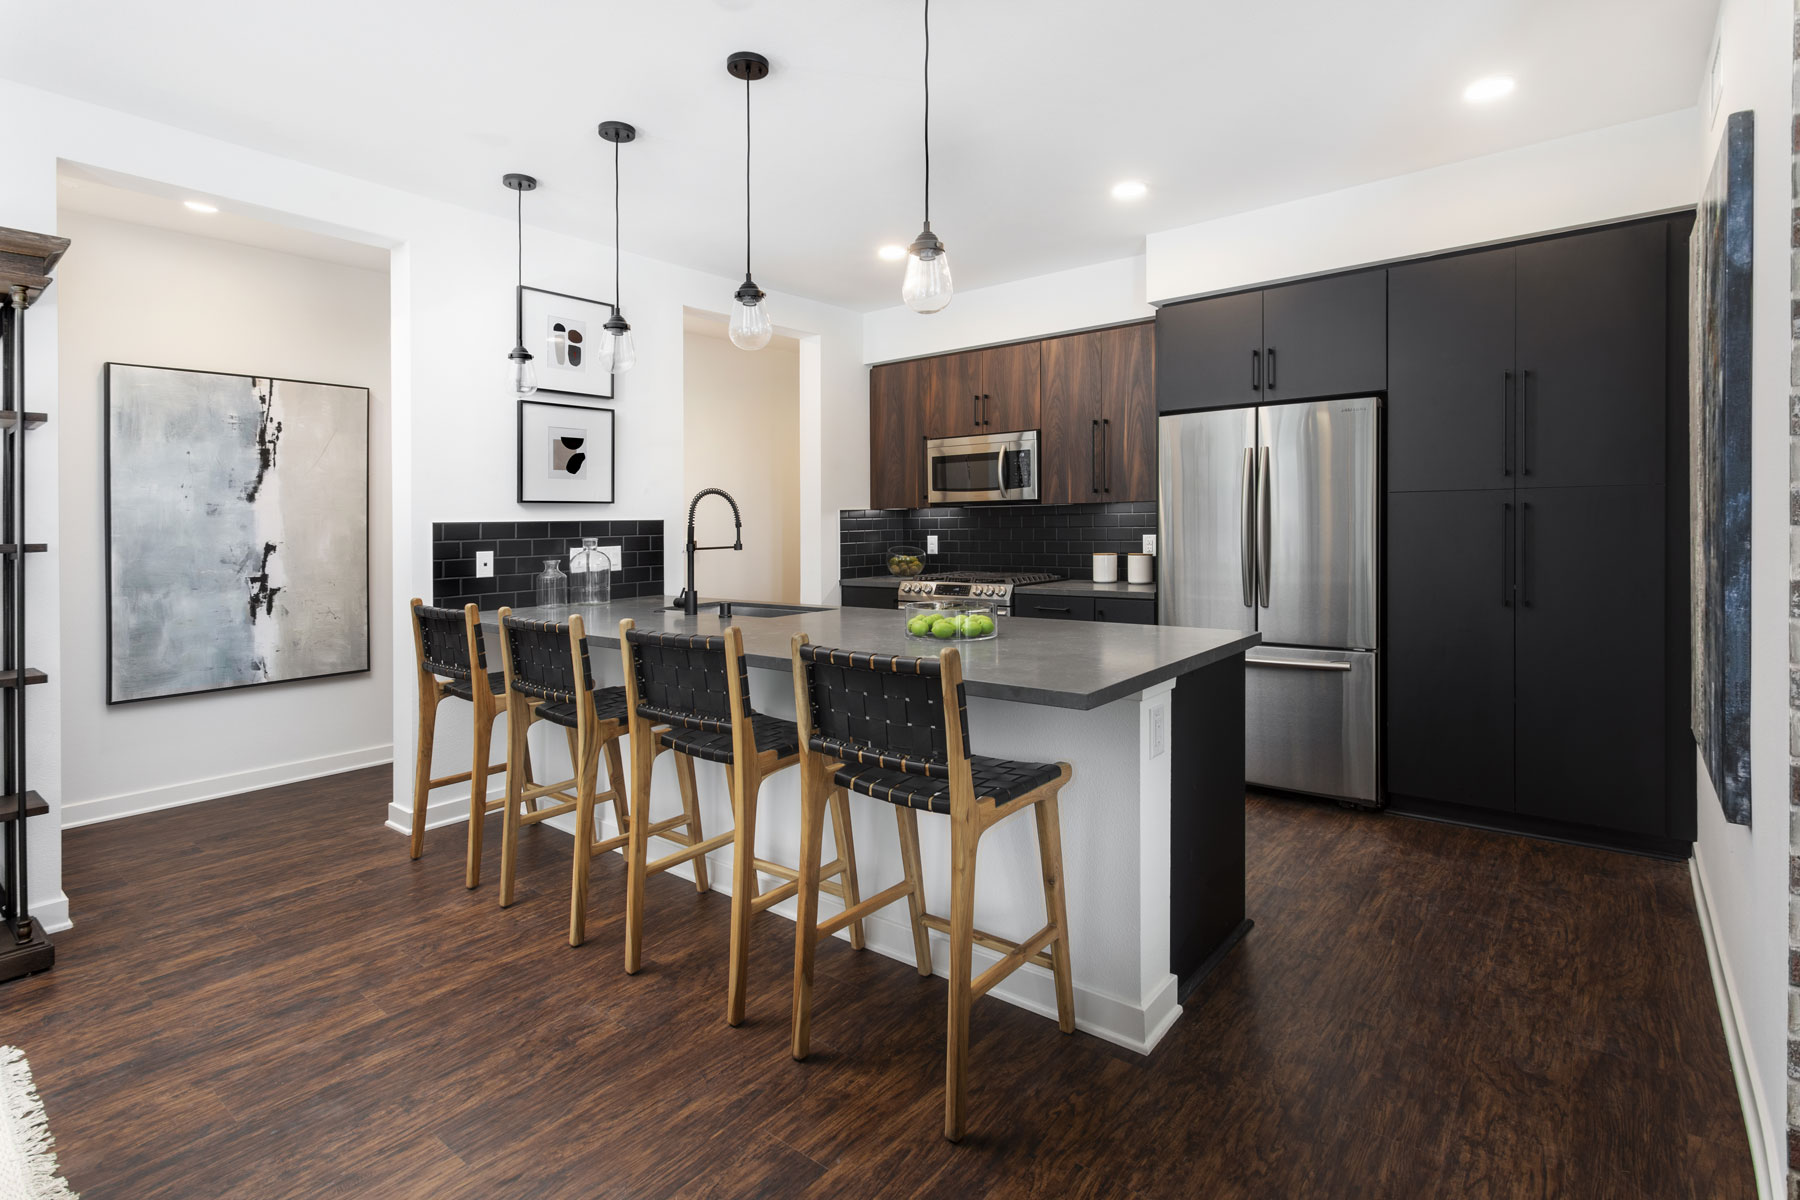 Artistry modern kitchen with black cabinetry and stainless steel appliances at Broadstone Archive Apartments